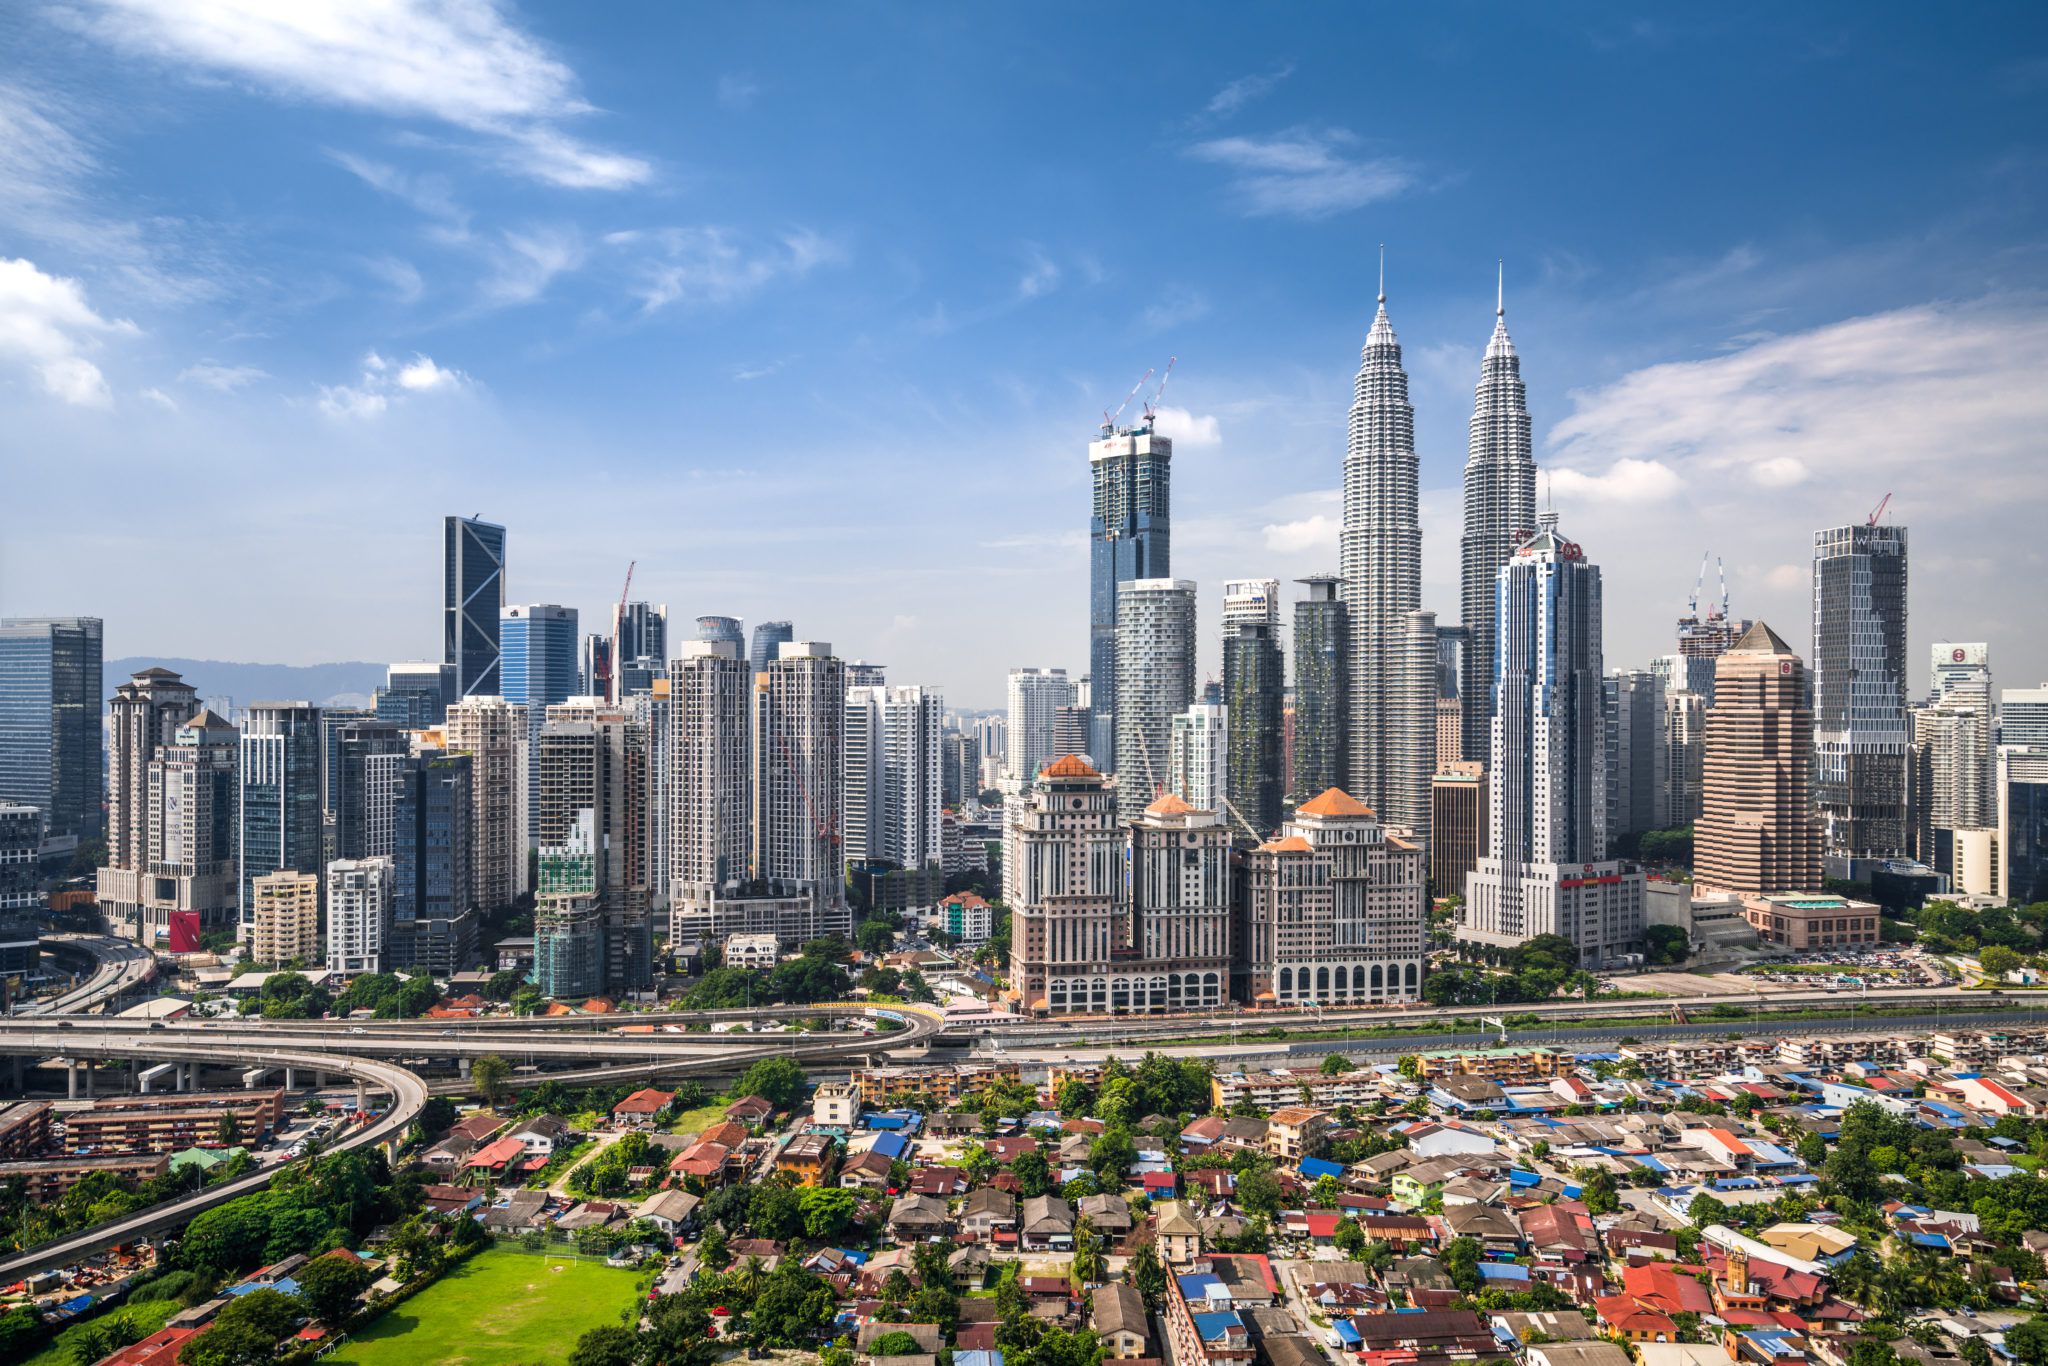 https://storage.googleapis.com/realtyplusmag-news-photo/news-photo/111031.Malaysia-Commercial-Real-Estate-Attracting-Chinese-Investors.jpg